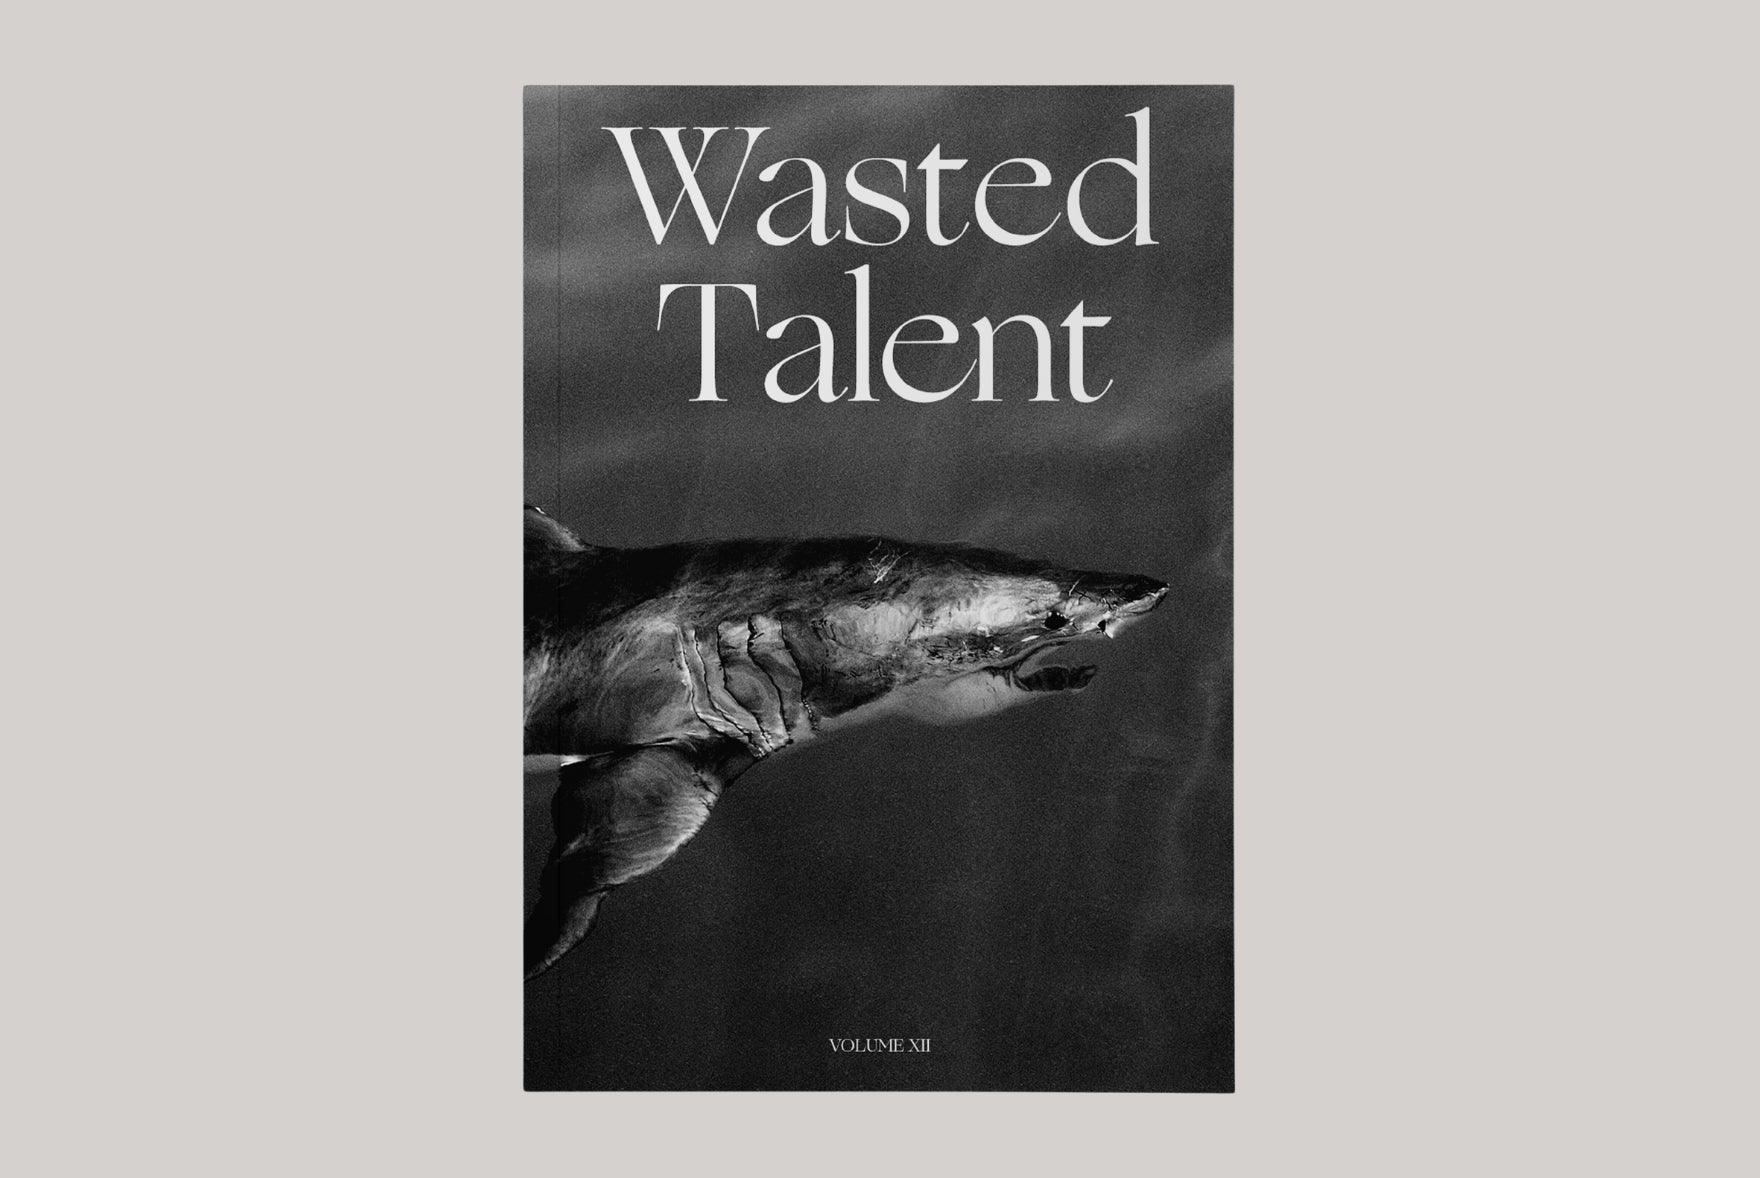 Wasted Talent Magazine Volume XII